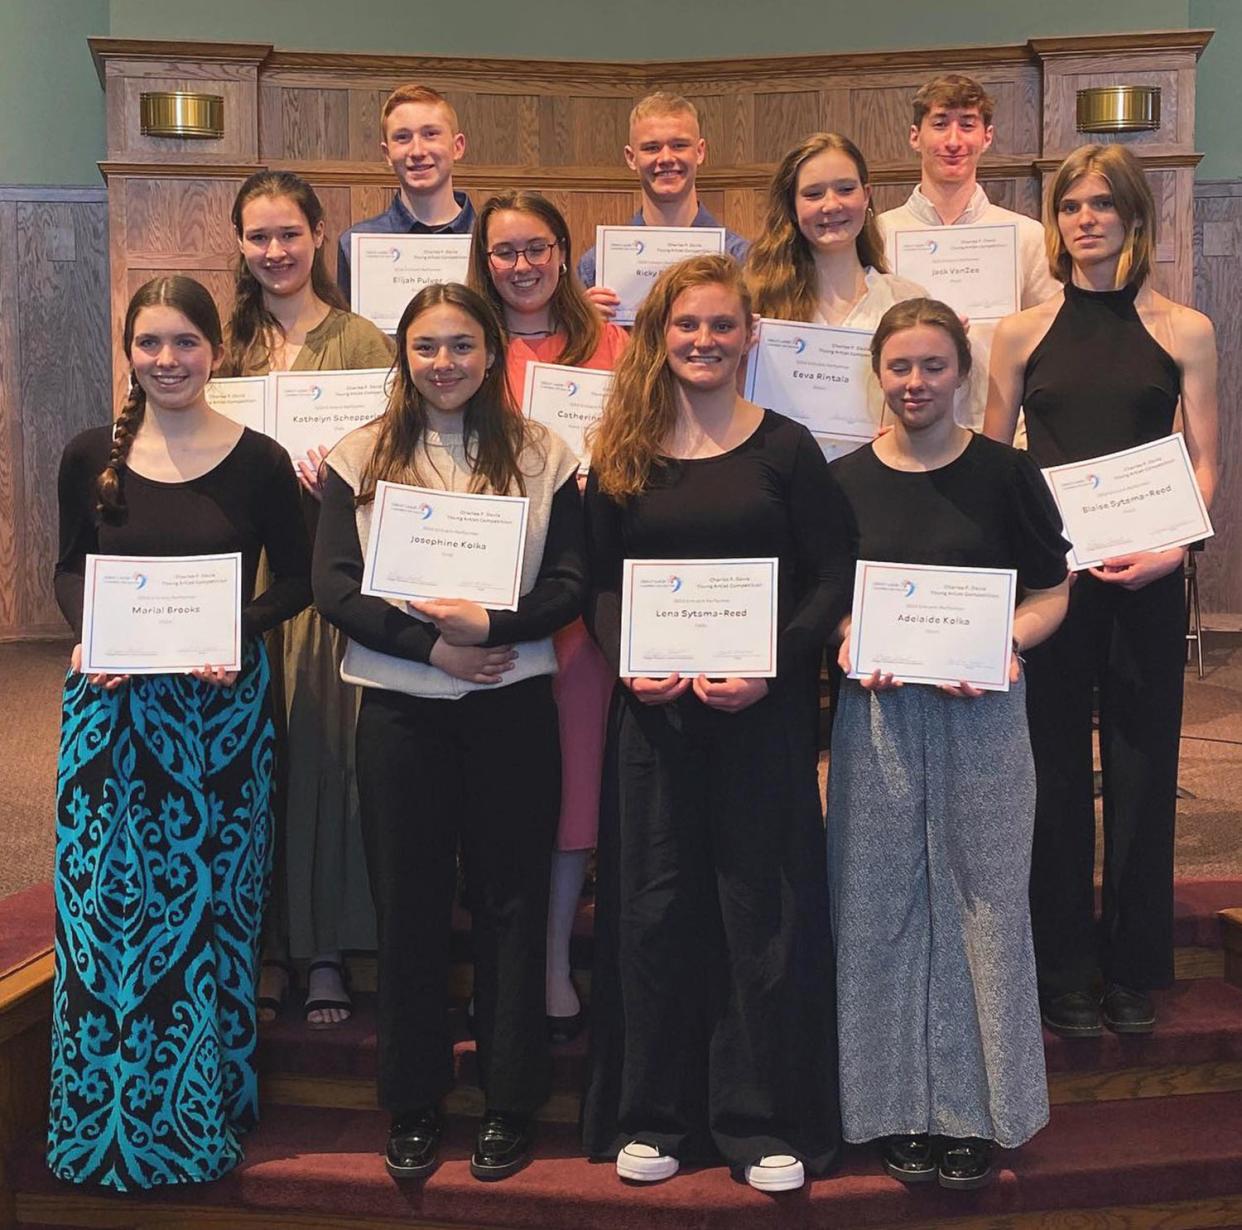 Young Artist Competition participants (back row, from left) are Elijah Pulver, Ricky Bristol, Jack Van Zee, (middle row) Katie Schepperley, Catherine Hayes, Eeva Rintala, Blaise Sytsma-Reed, (front row) Marial Brooks, Josie Kolka, Lena Sytsma-Reed and Addie Kolka.